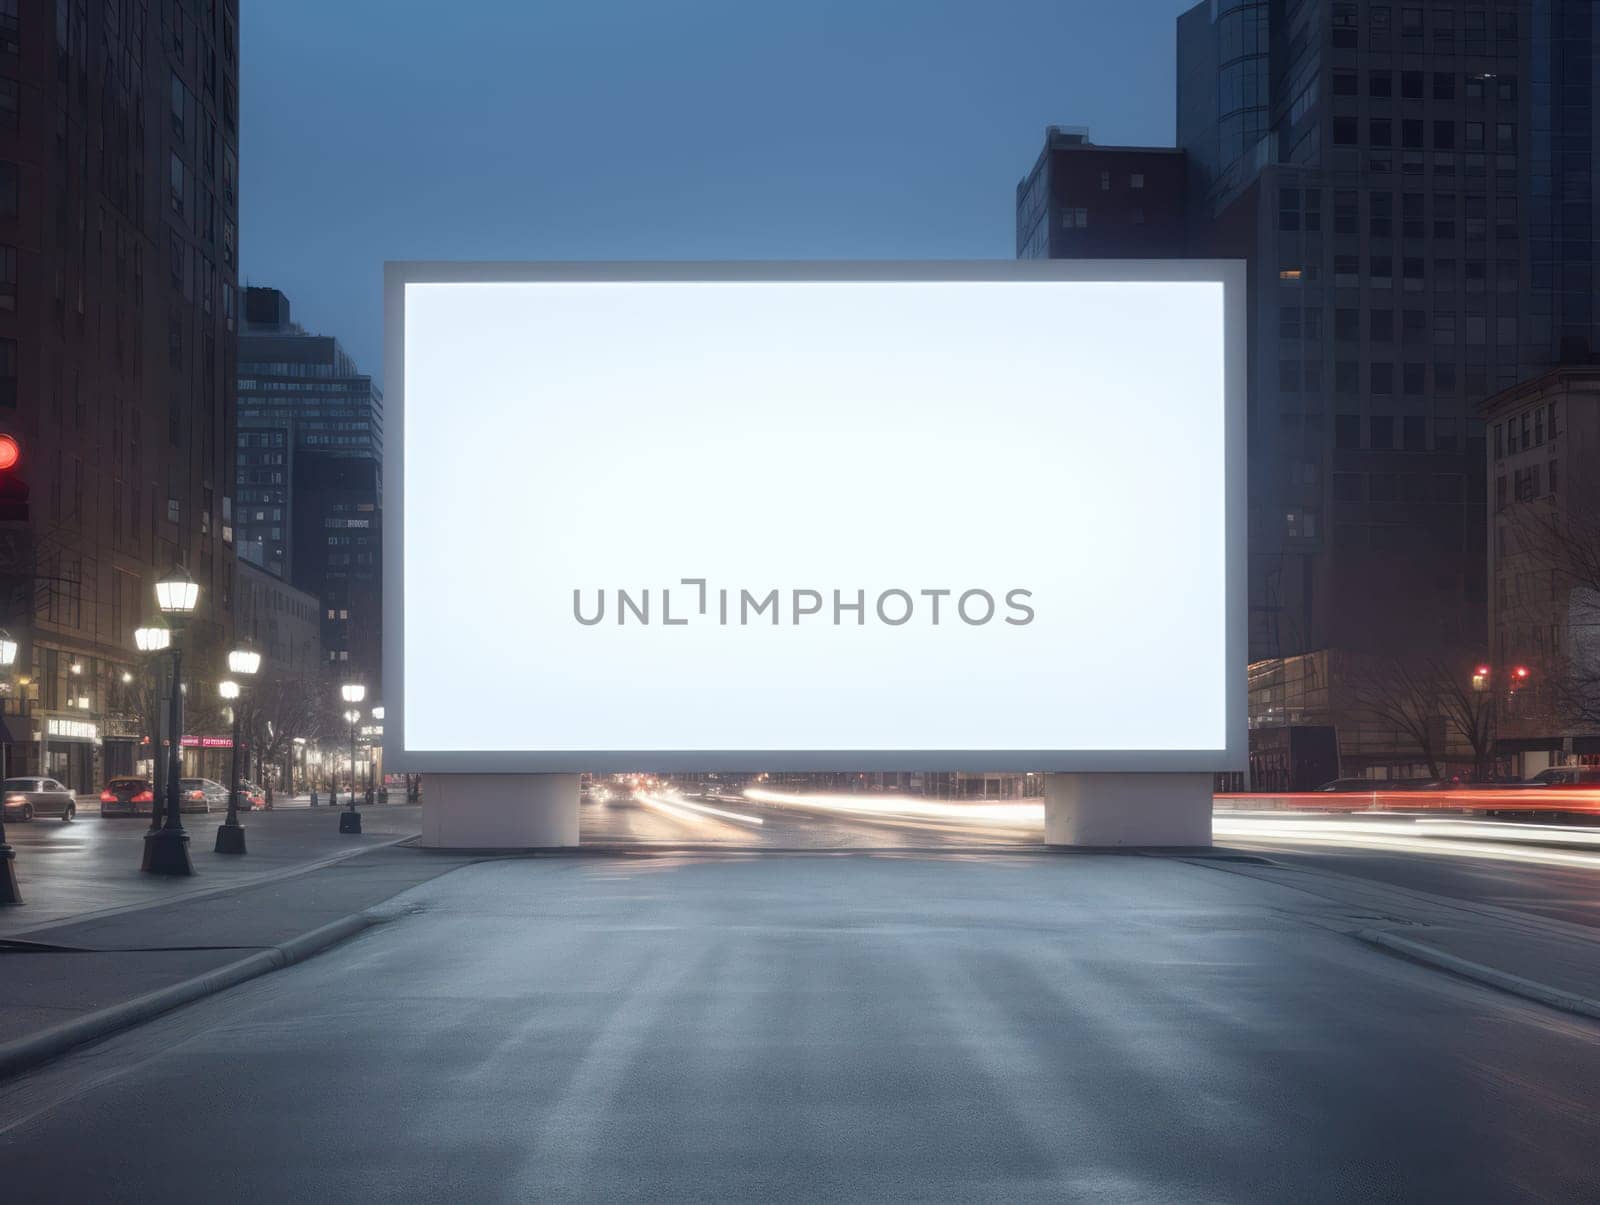 City Buzz: Illuminated Billboard Advertising Space with Blank Poster on Urban Street by Vichizh